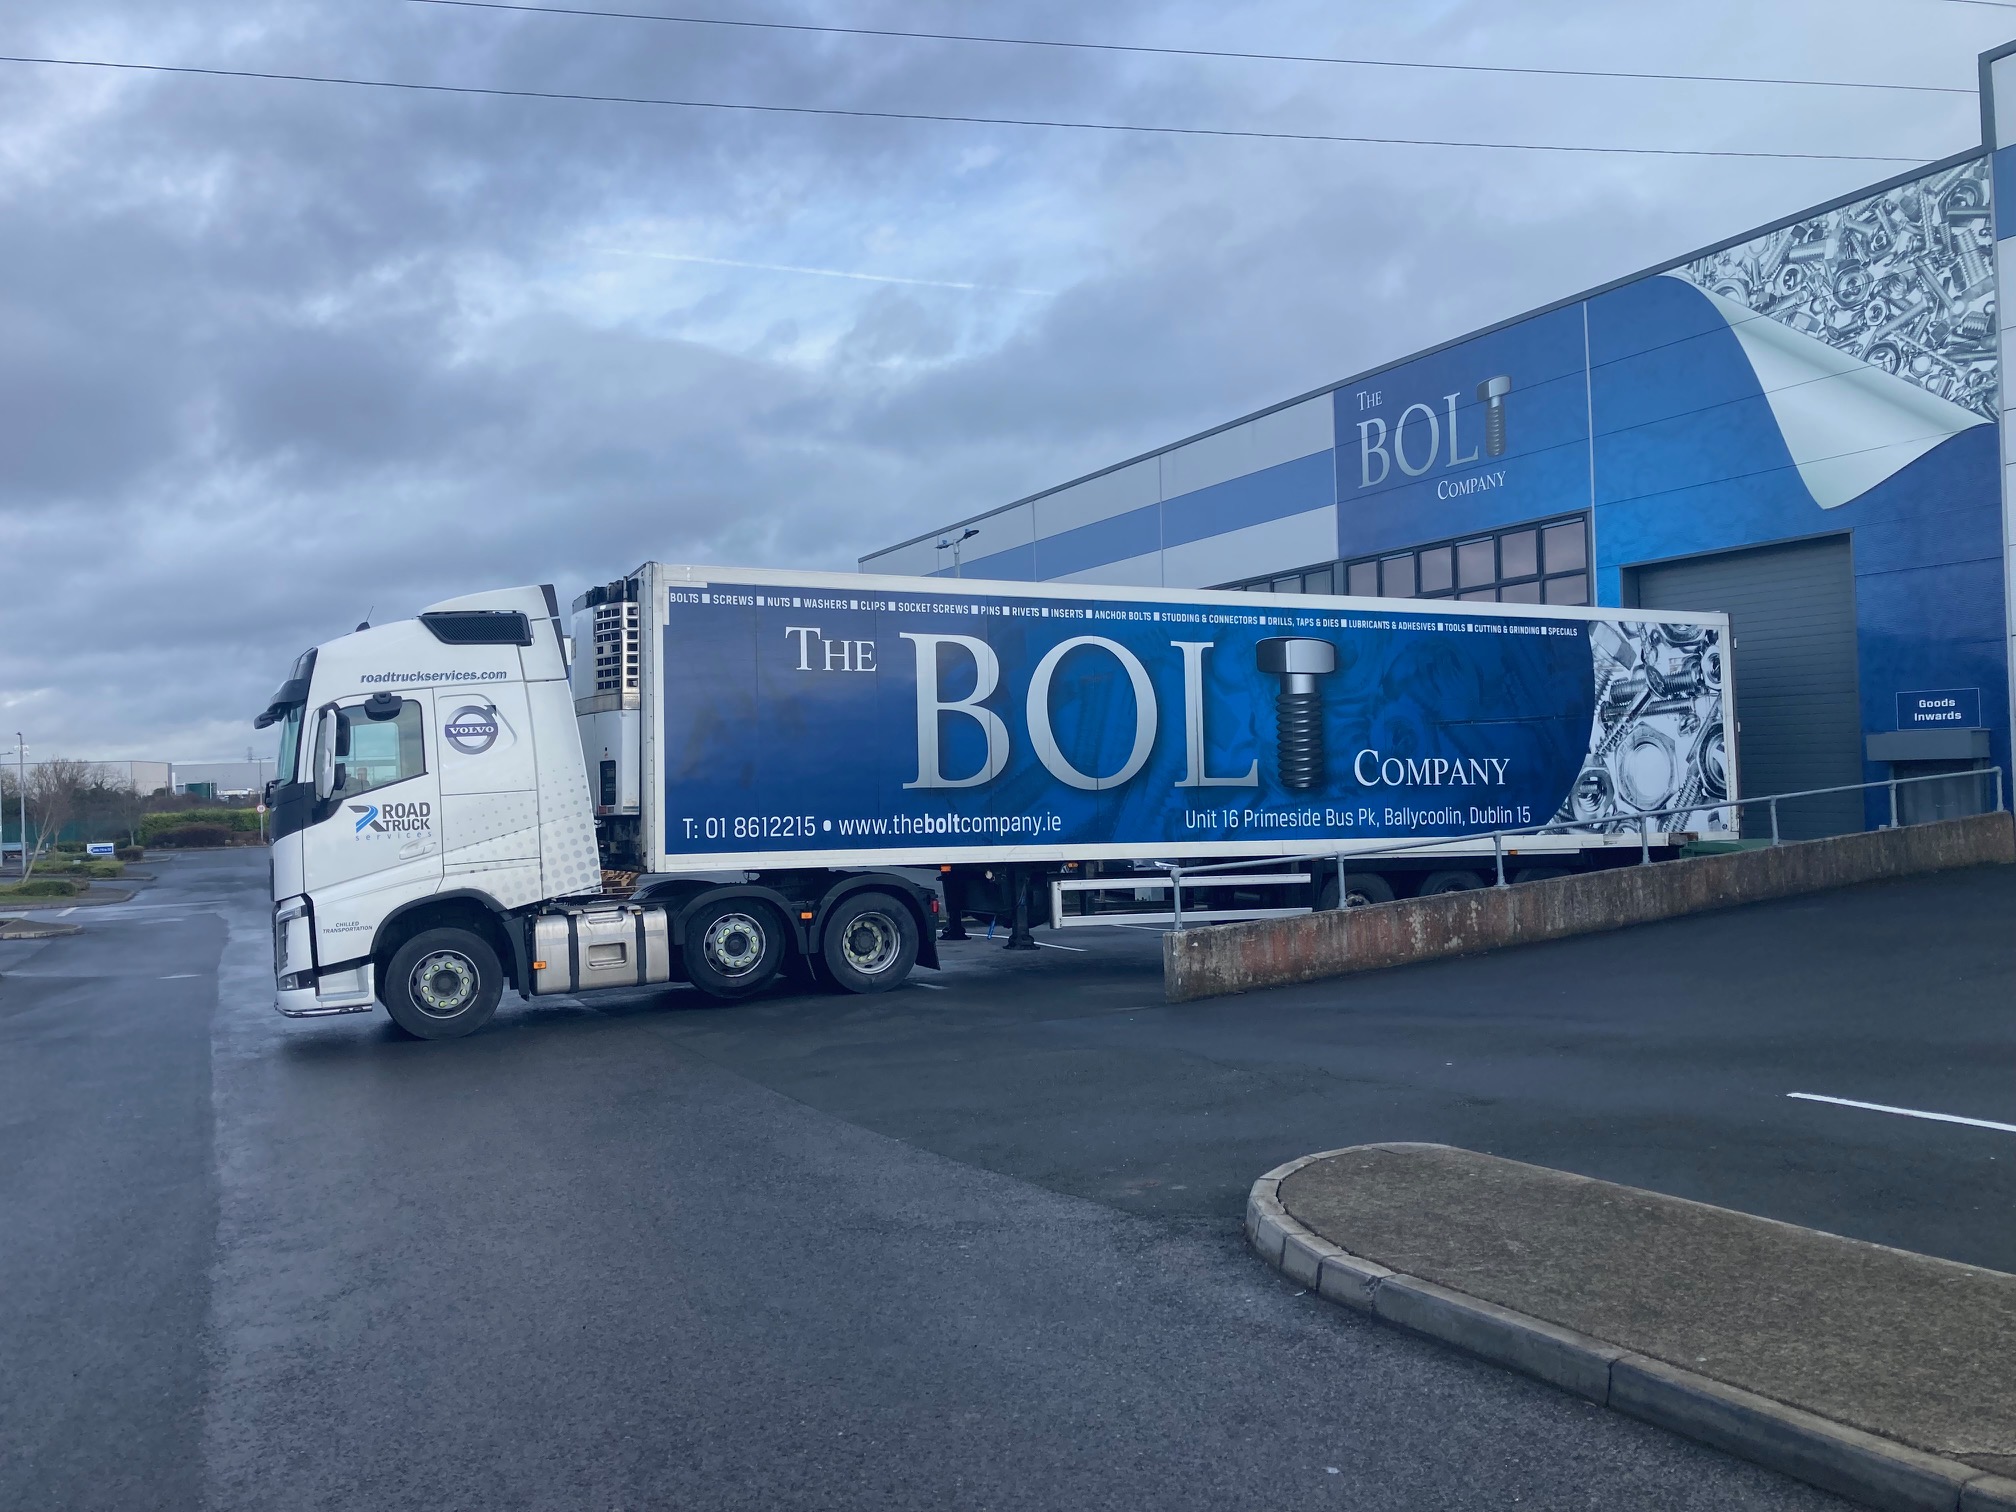 The Bolt Company industrial grade fasteners, fixings and engineering consumables throughout Ireland